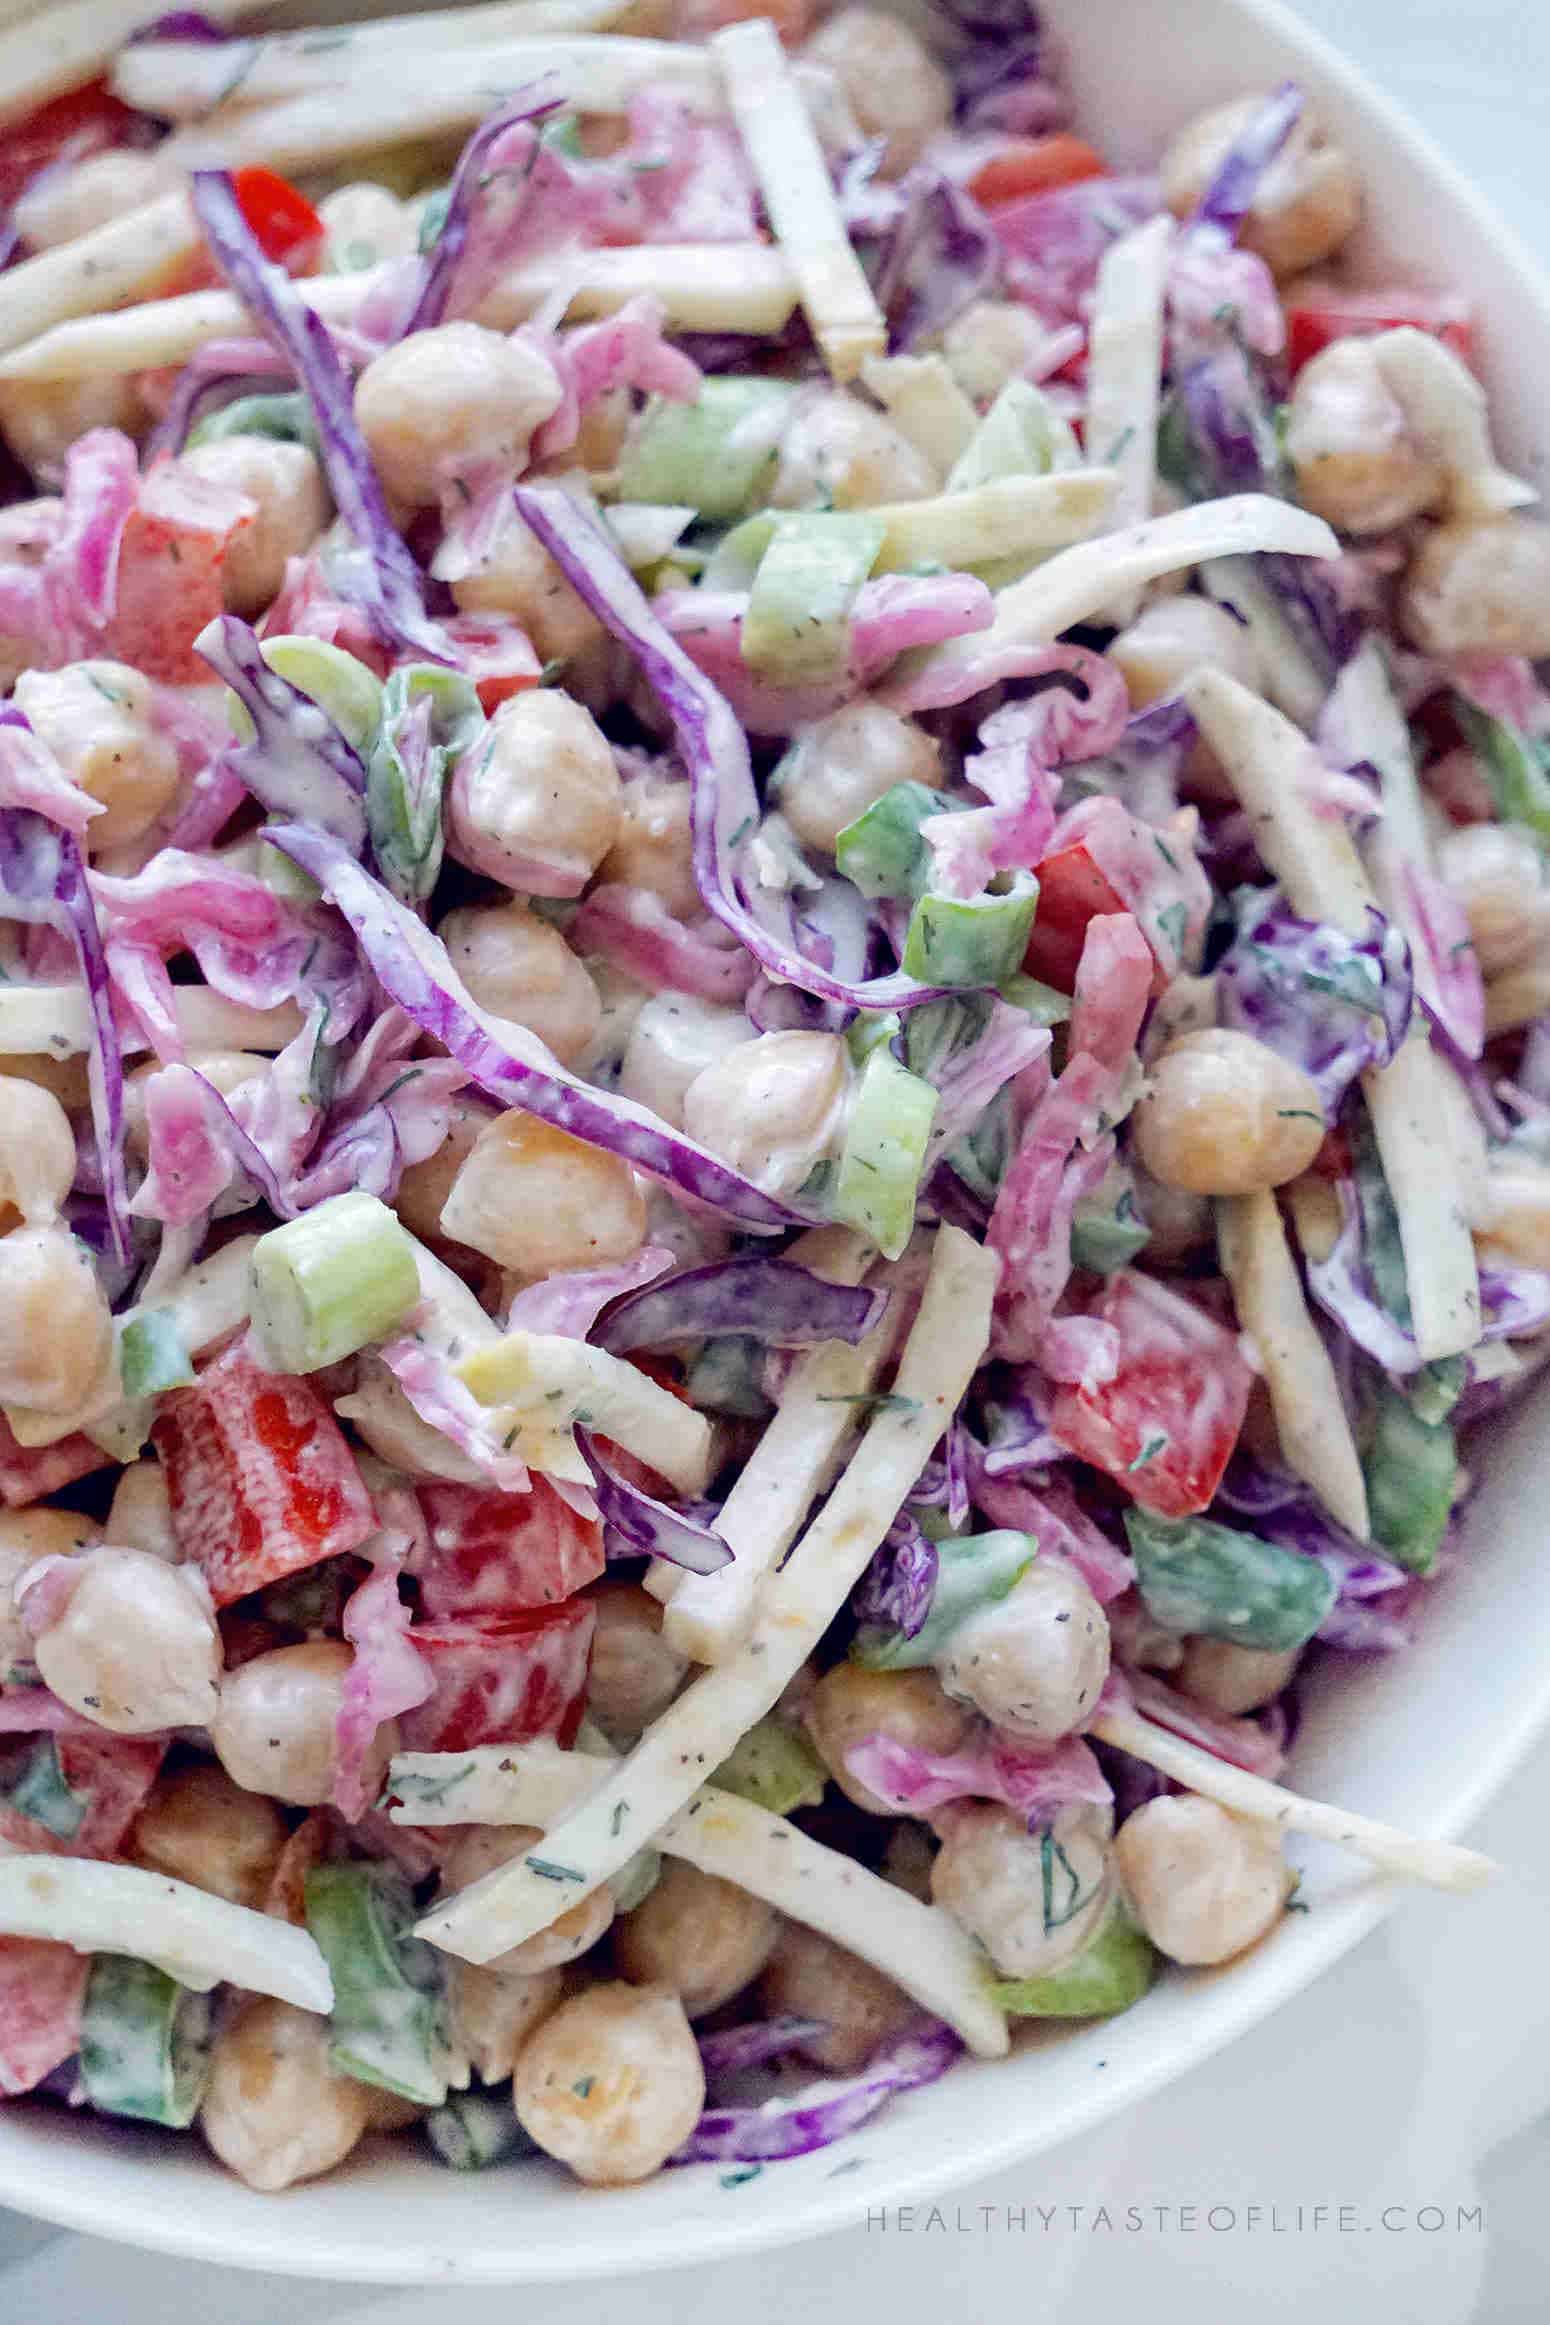 Assembled chickpea salad with cabbage and veggies tossed with a creamy dressing.